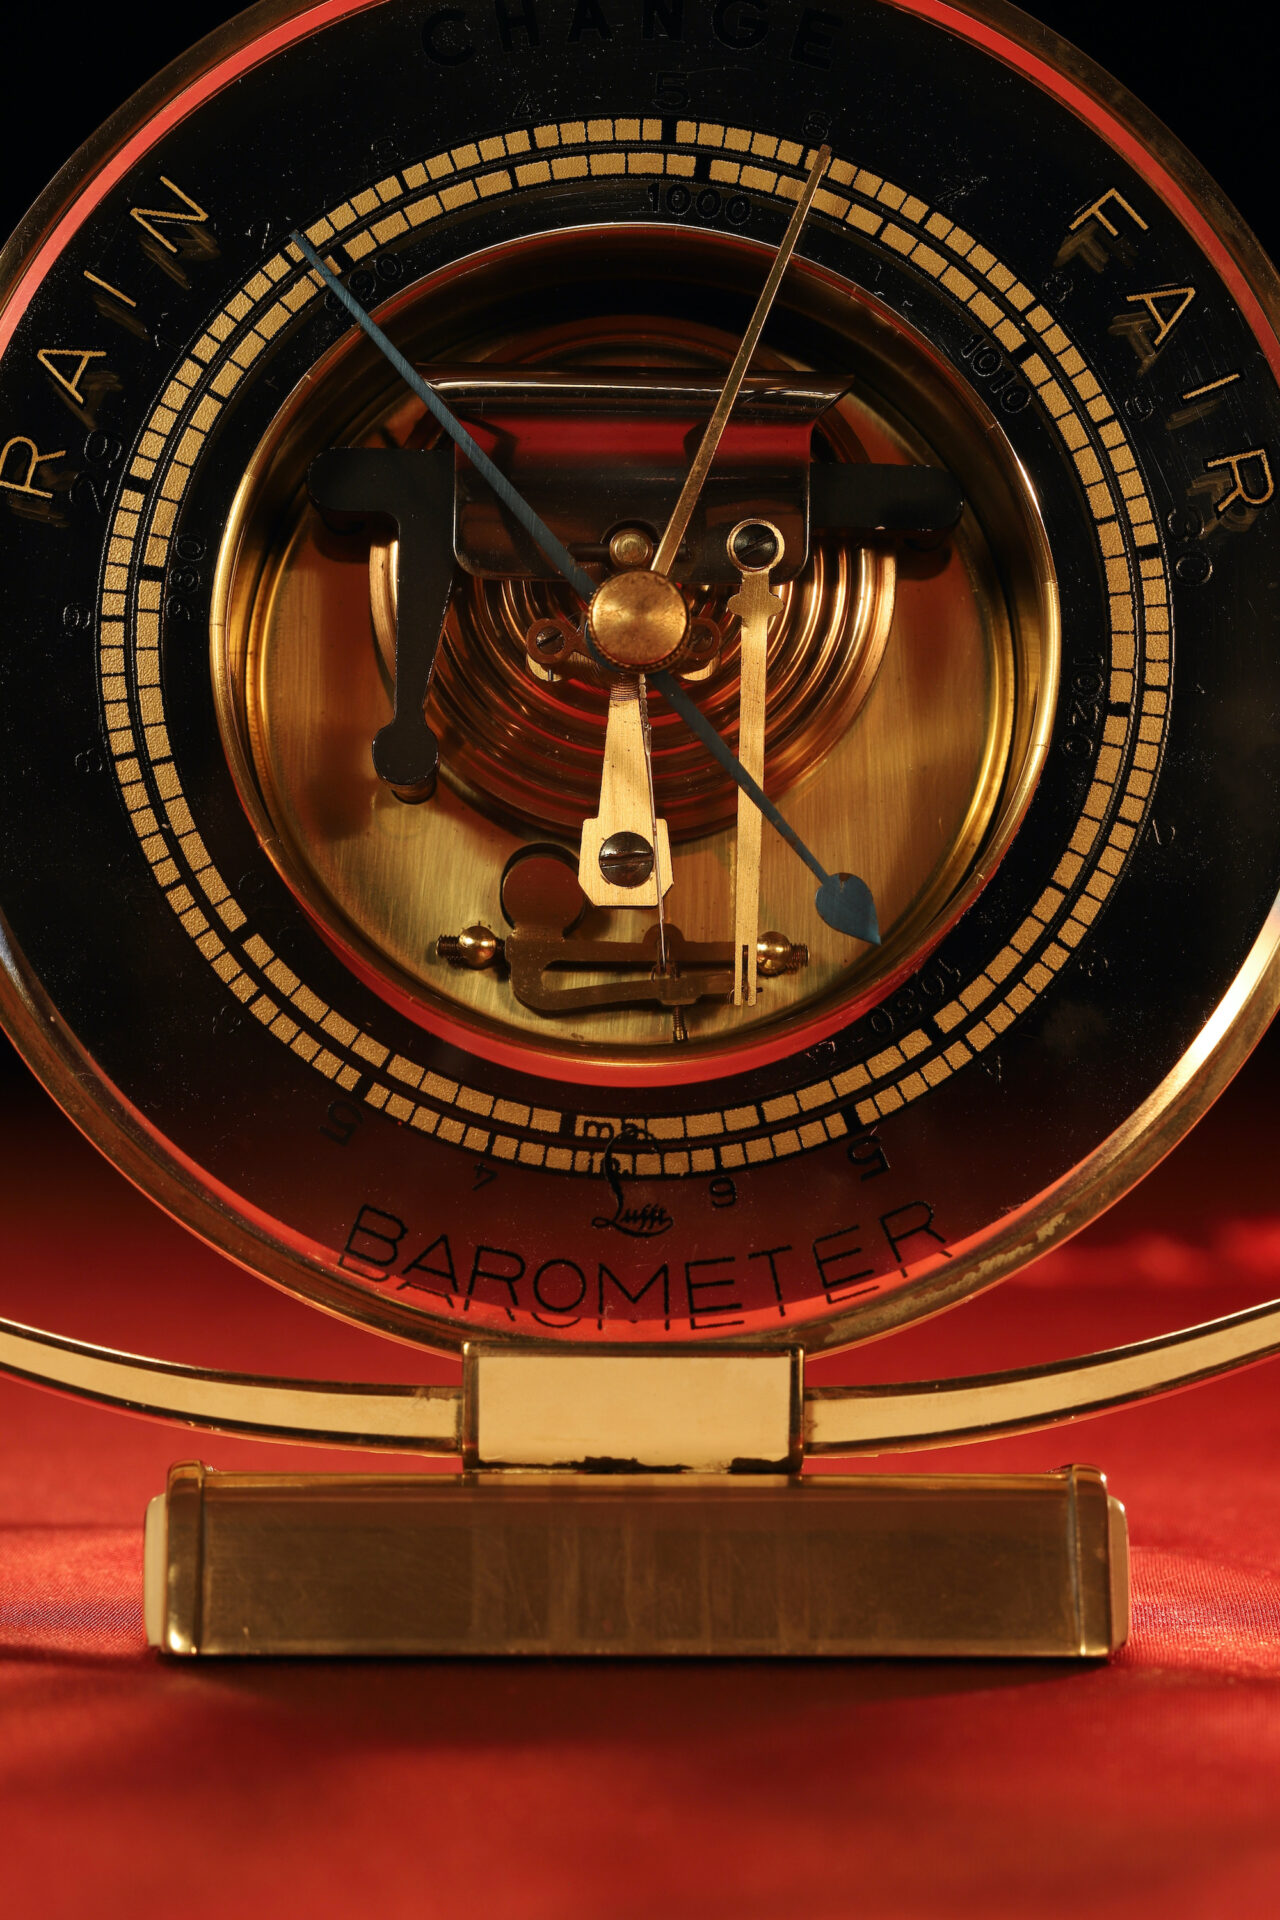 Close up of barometer from Lufft Desk Compendium c1935